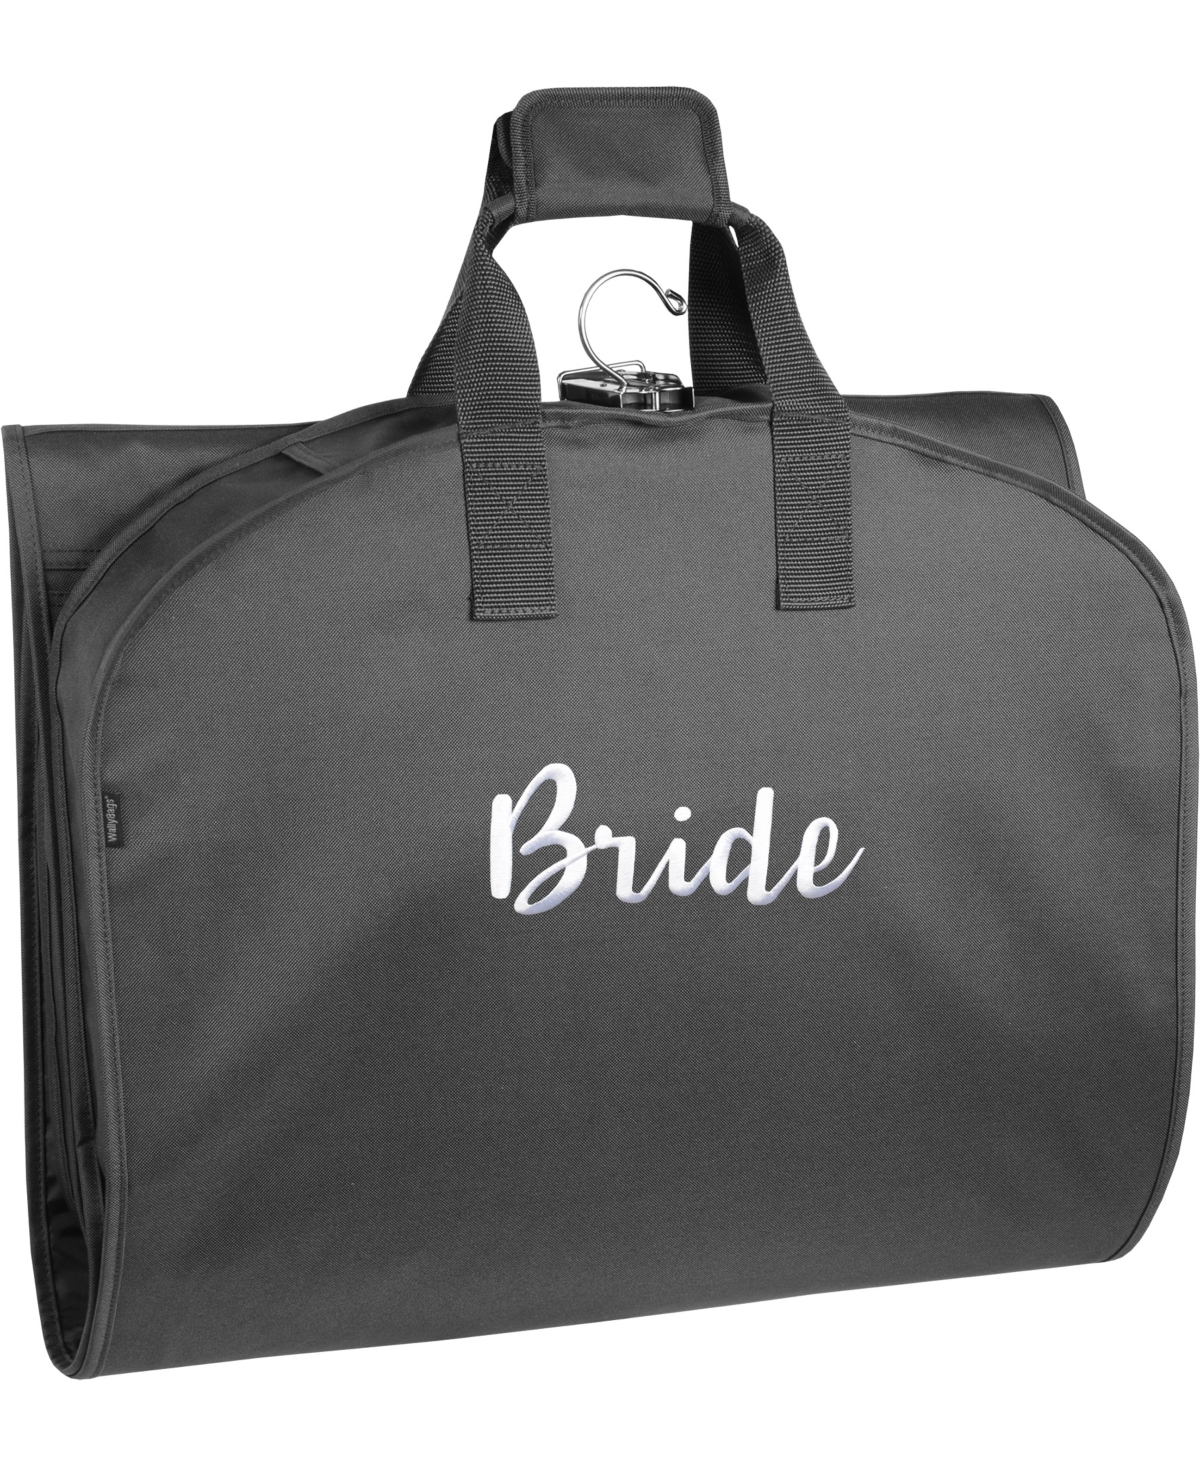 Wallybags 60" Premium Tri-fold Travel Garment Bag With Pocket And Bride Embroidery In Black - B